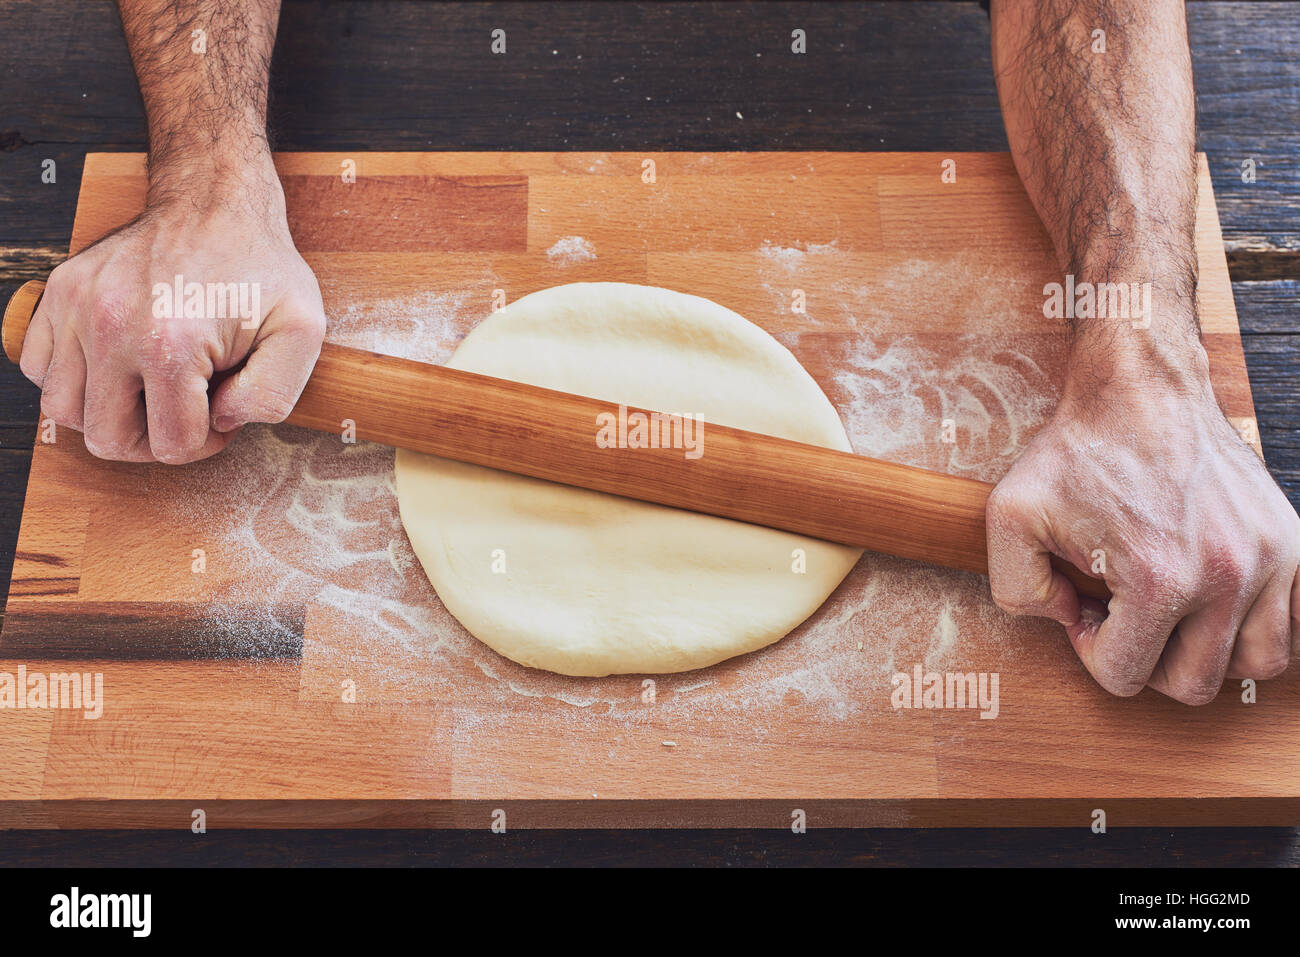 Making handmade pasta with wooden rolling pin Stock Photo